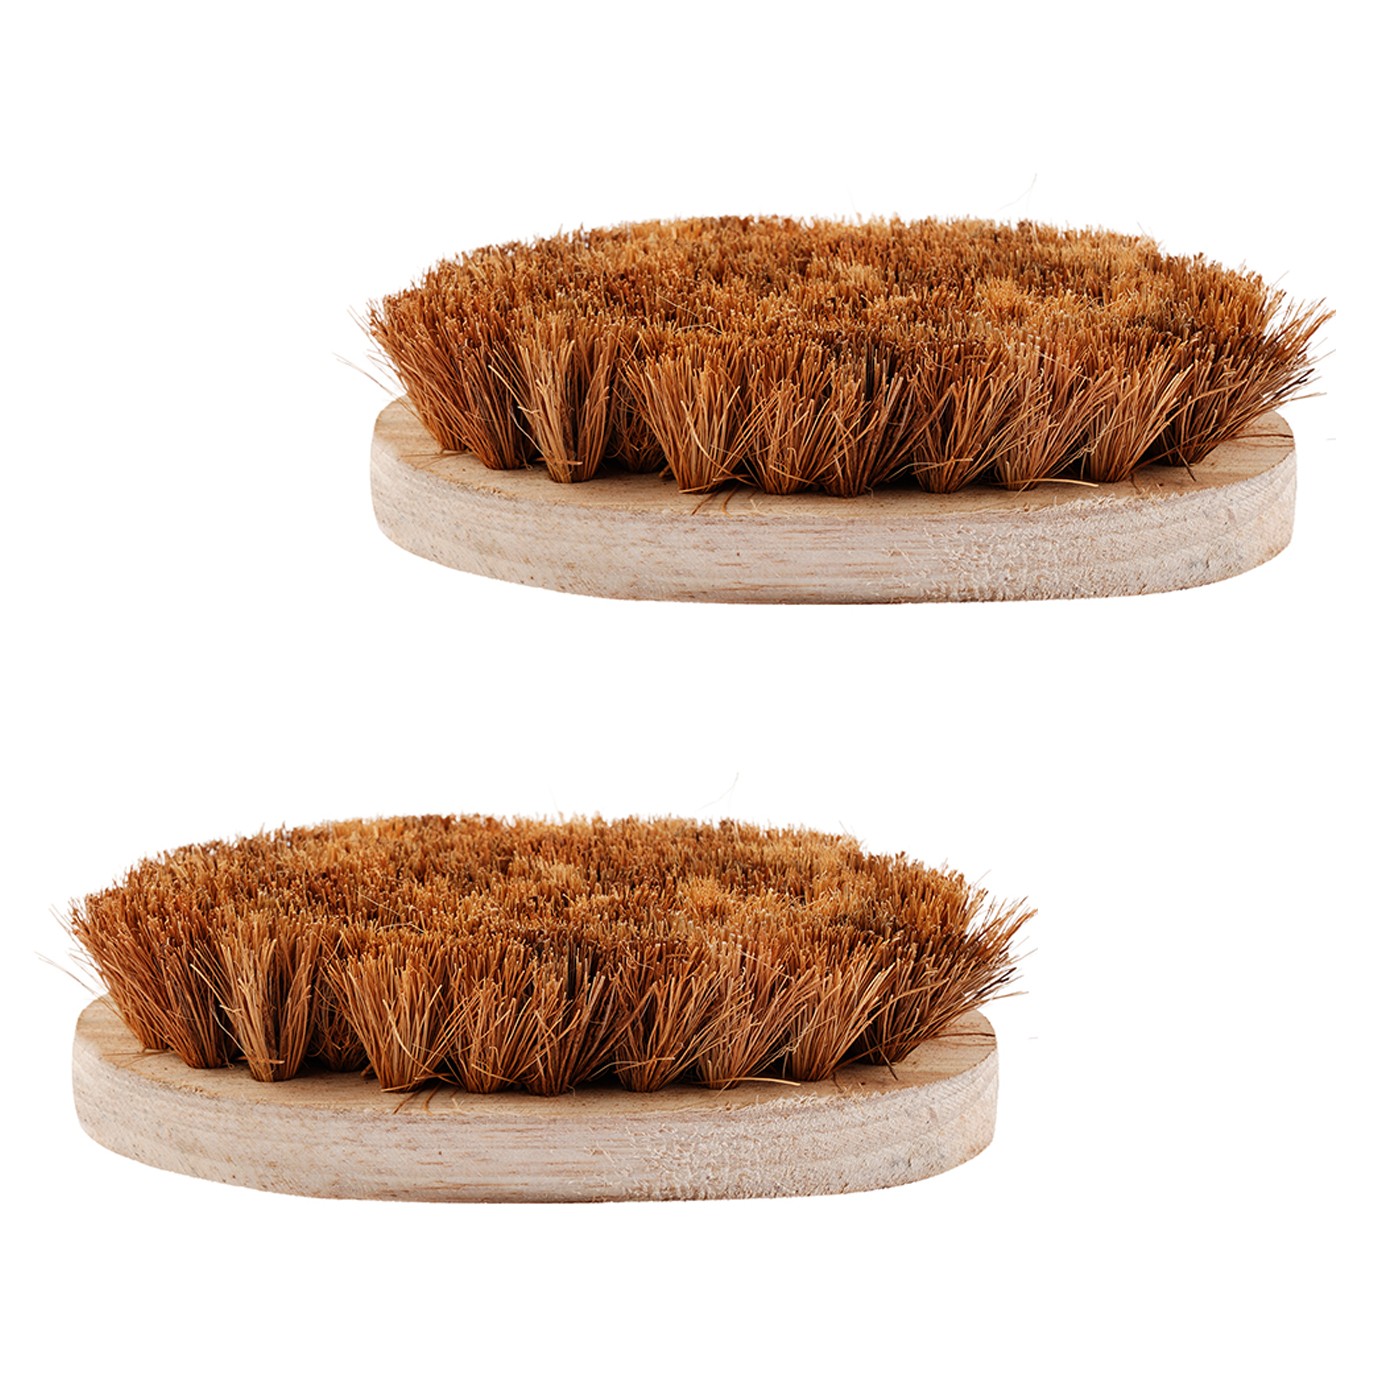 Multipurpose Coir Washing Brush - Eco-Friendly Cleaning for Various Surfaces"- 6 inch Oval Shape-(Pack of 2)